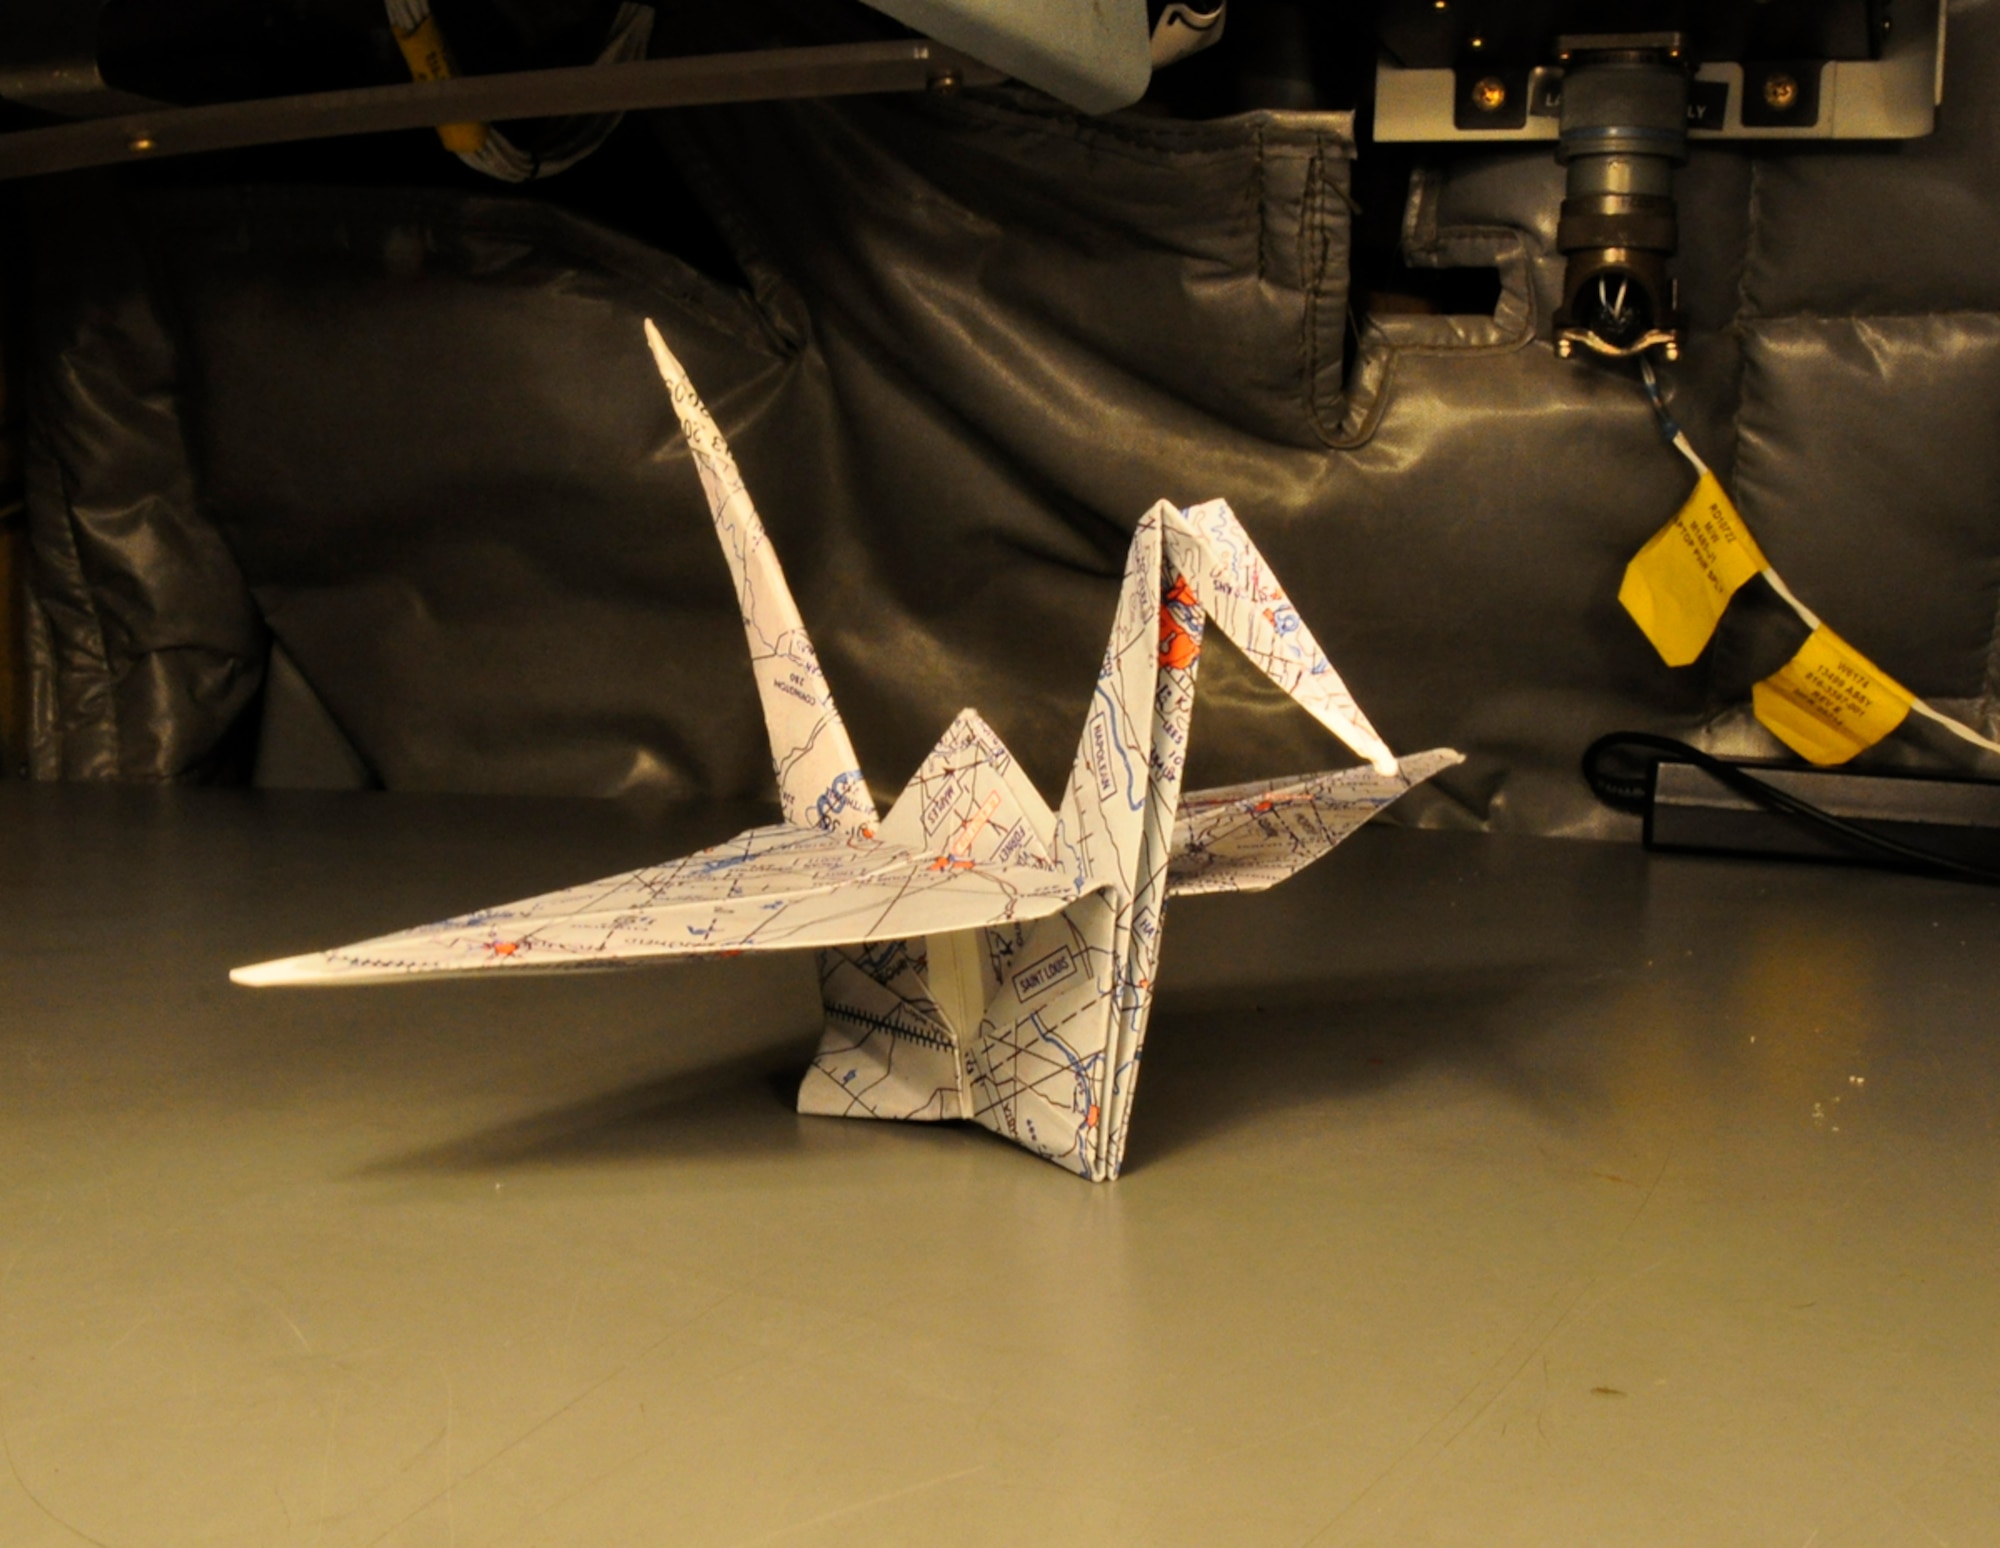 An origami crane sits on display inside a KC-135 Stratotanker flown during what Lt. Col. Tsuyoshi "T" Tung declared an Asian-Pacific American Heritage Sortie on May 27. Colonel Tung is a KC-135 pilot assigned to the 18th Air Refueling Squadron, the flying unit of the 931st Air Refueling Group. He was born in Japan and moved to the United States when he was 5 years old. (Courtesy photo/Lt. Col. Tsuyoshi Tung)